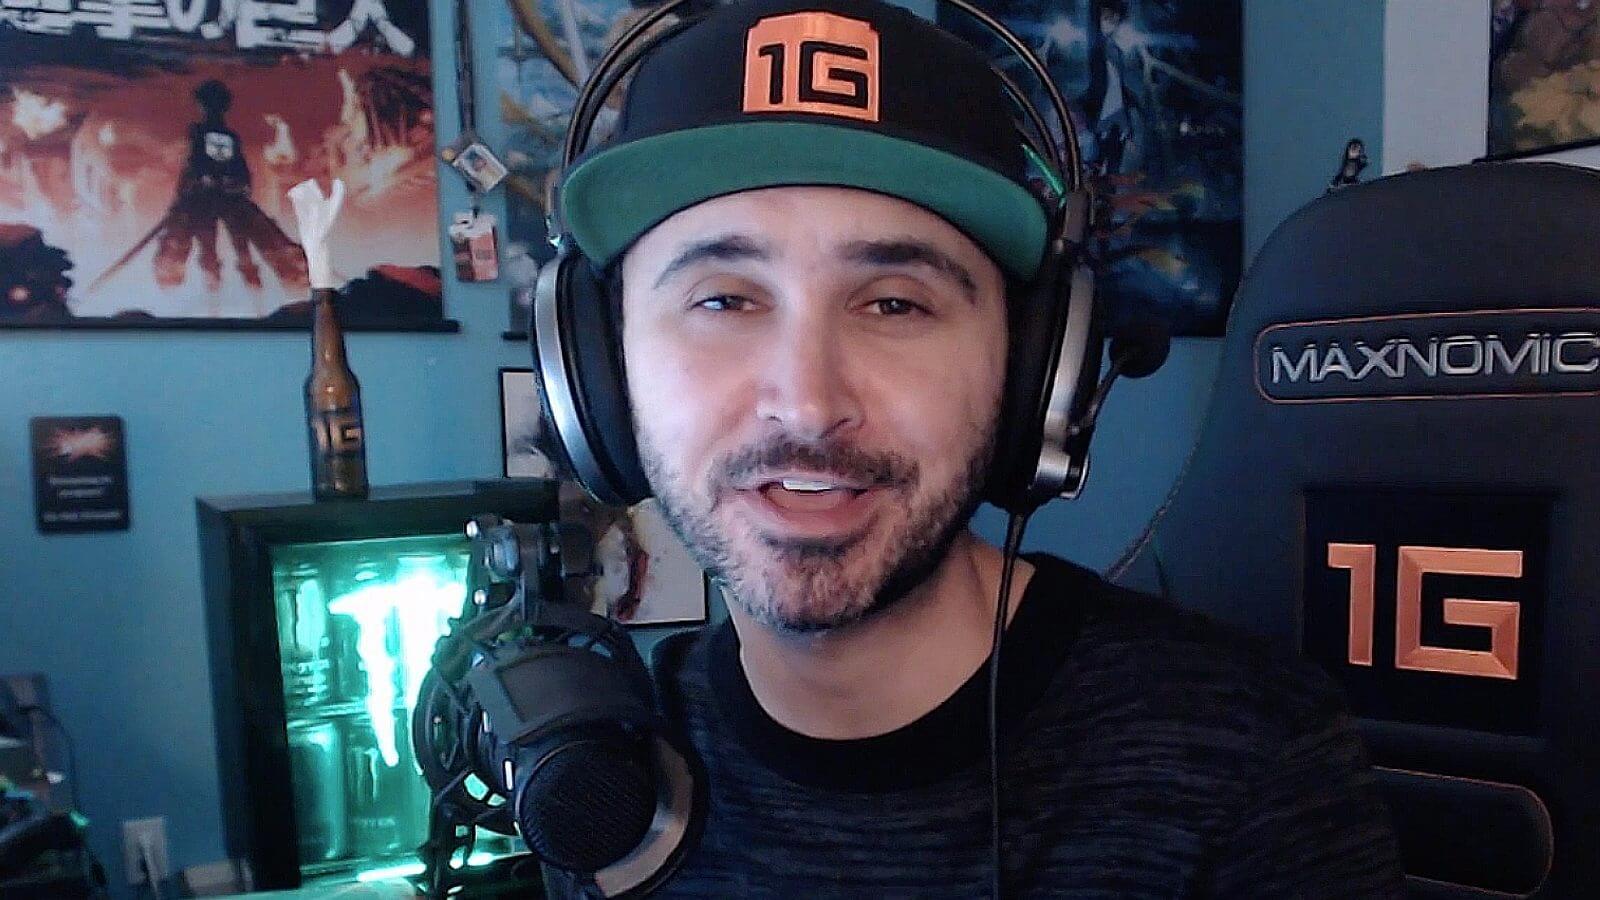 summit1g-blazed-high-weed-funny-stoned-clips.jpg